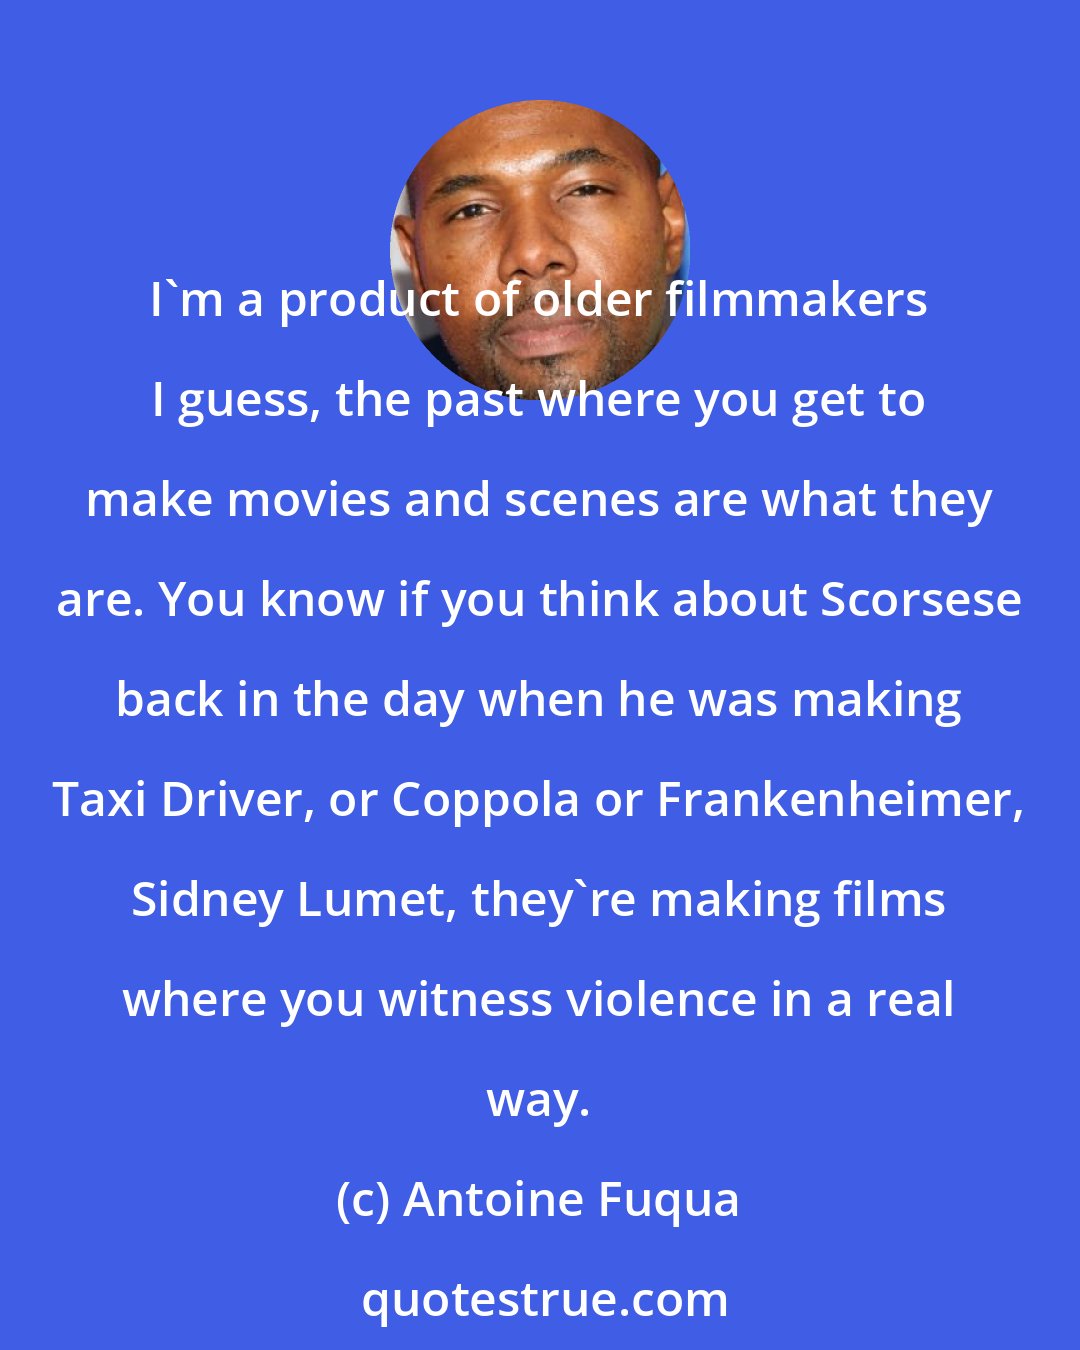 Antoine Fuqua: I'm a product of older filmmakers I guess, the past where you get to make movies and scenes are what they are. You know if you think about Scorsese back in the day when he was making Taxi Driver, or Coppola or Frankenheimer, Sidney Lumet, they're making films where you witness violence in a real way.